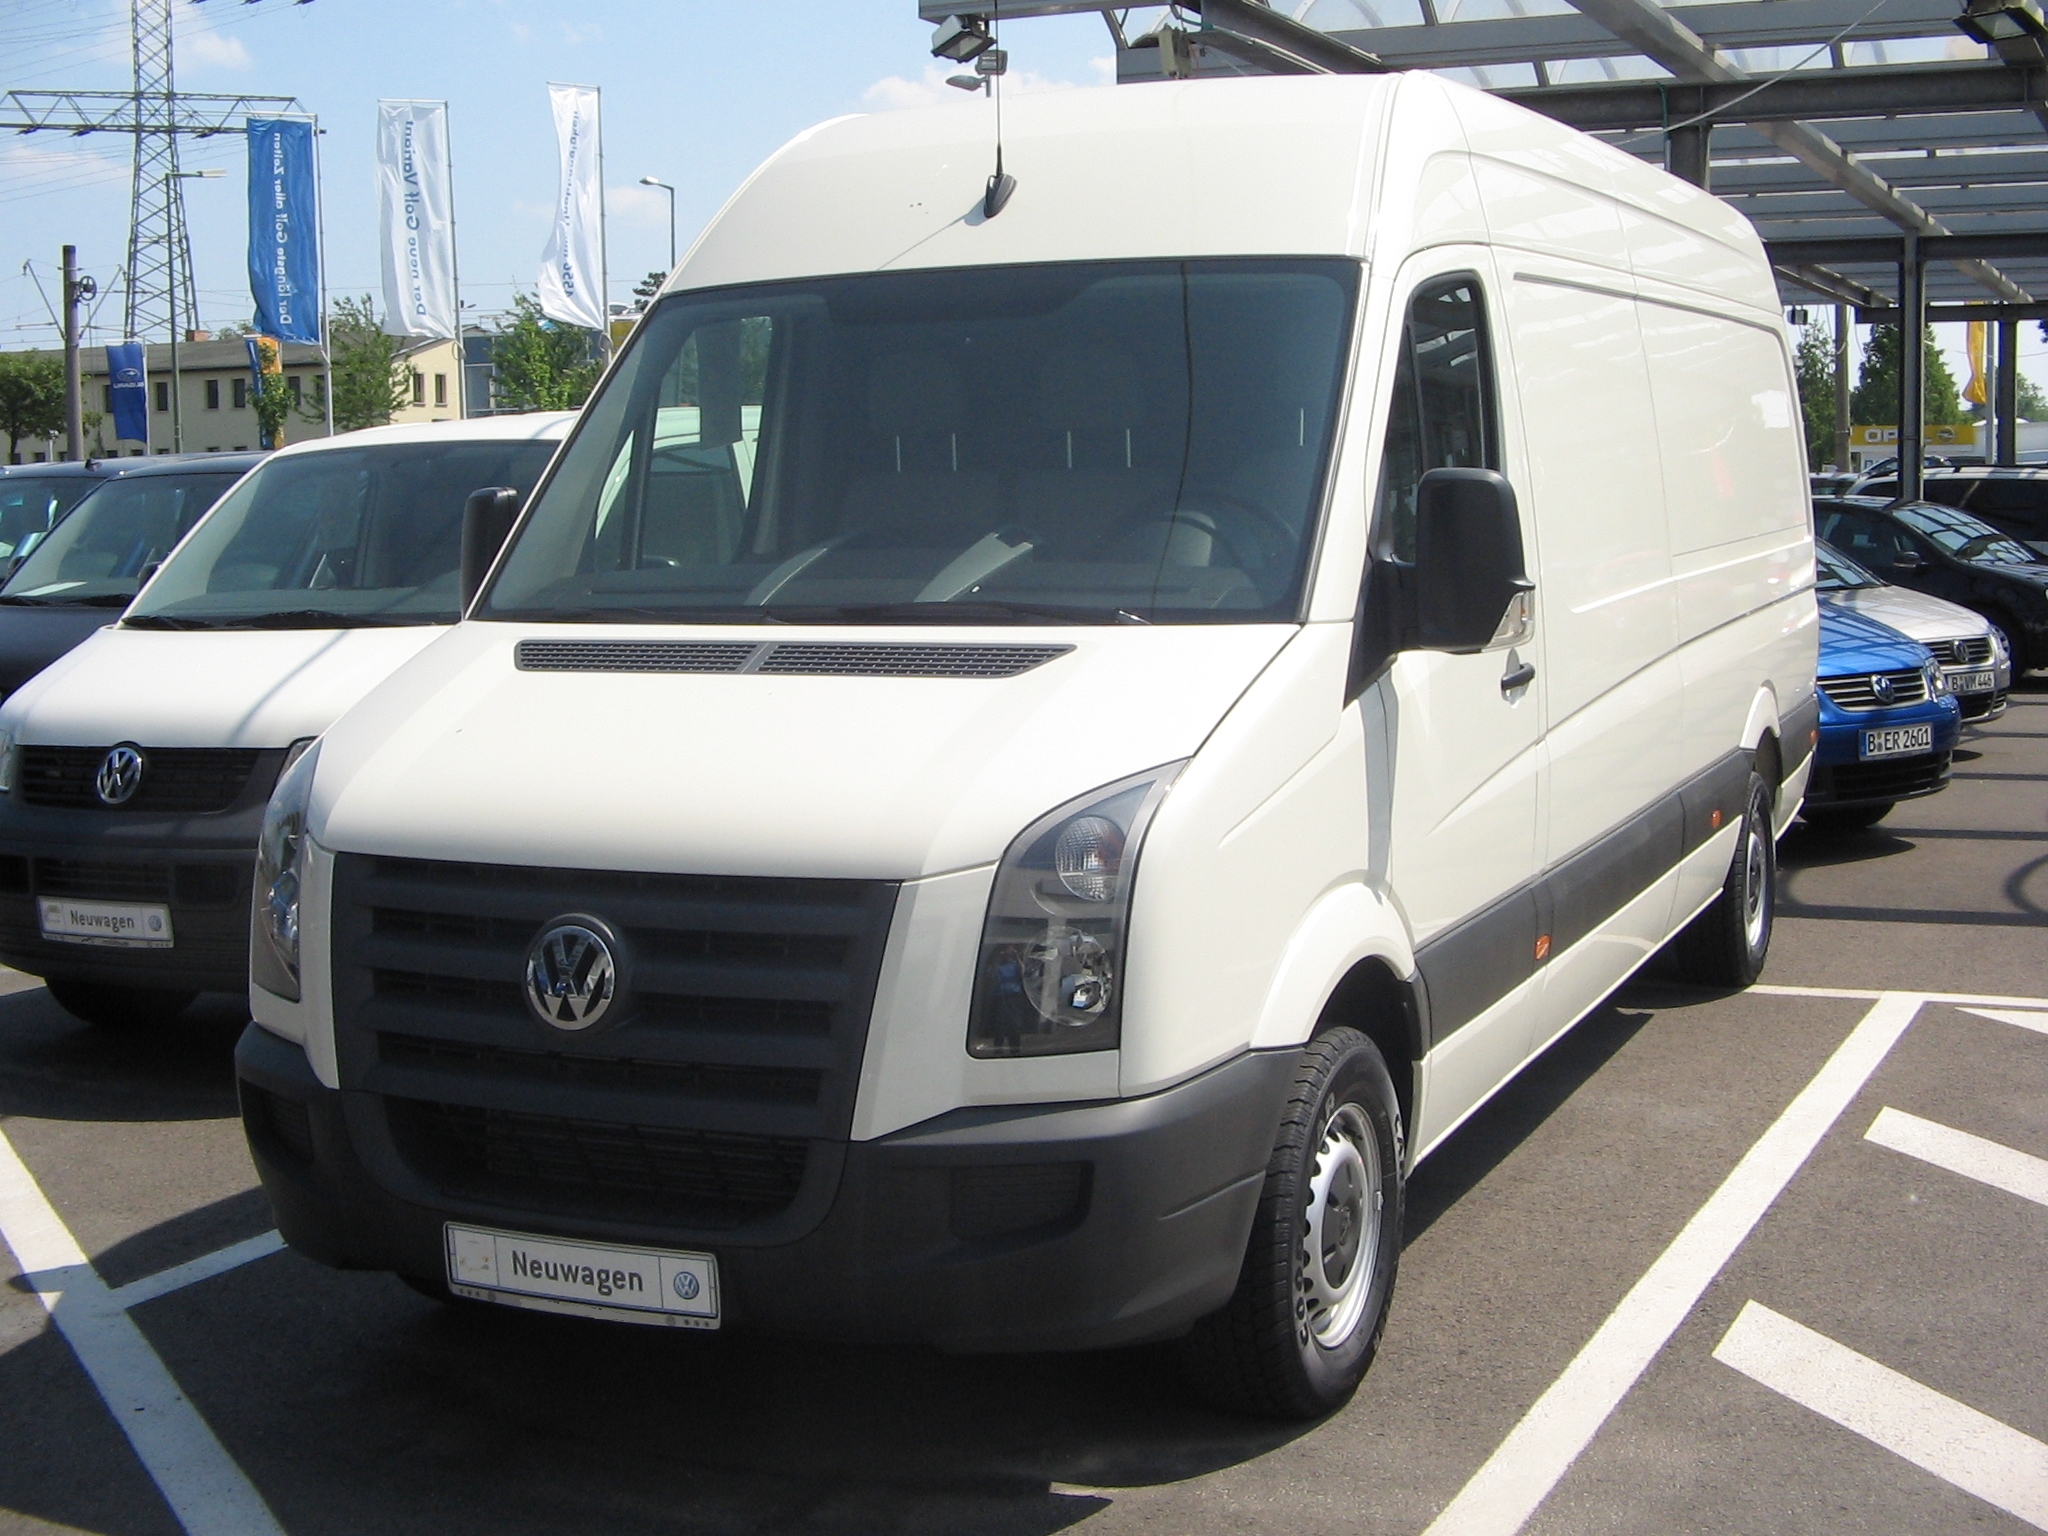 File:VW Crafter IMG 0772.jpg - Simple English Wikipedia, the free